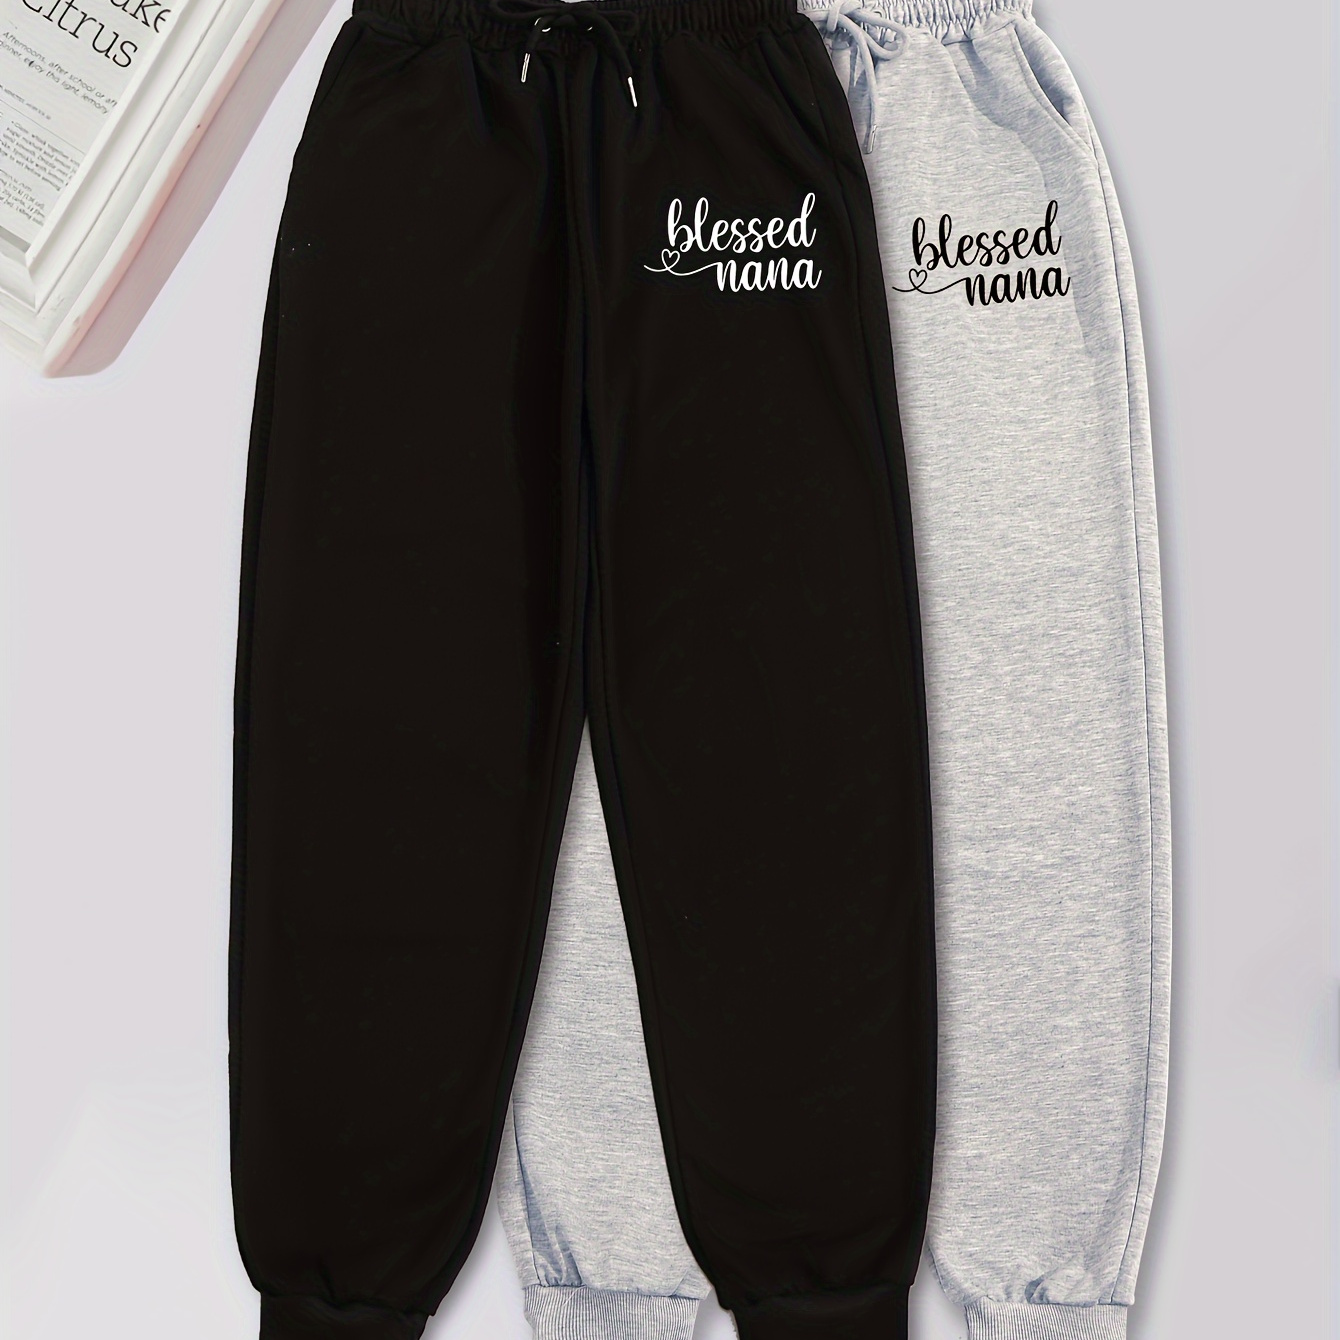 

Blessed Nana Print Jogger Sweatpants 2 Pack, Casual Drawstring Sporty Pants With Pocket, Women's Clothing